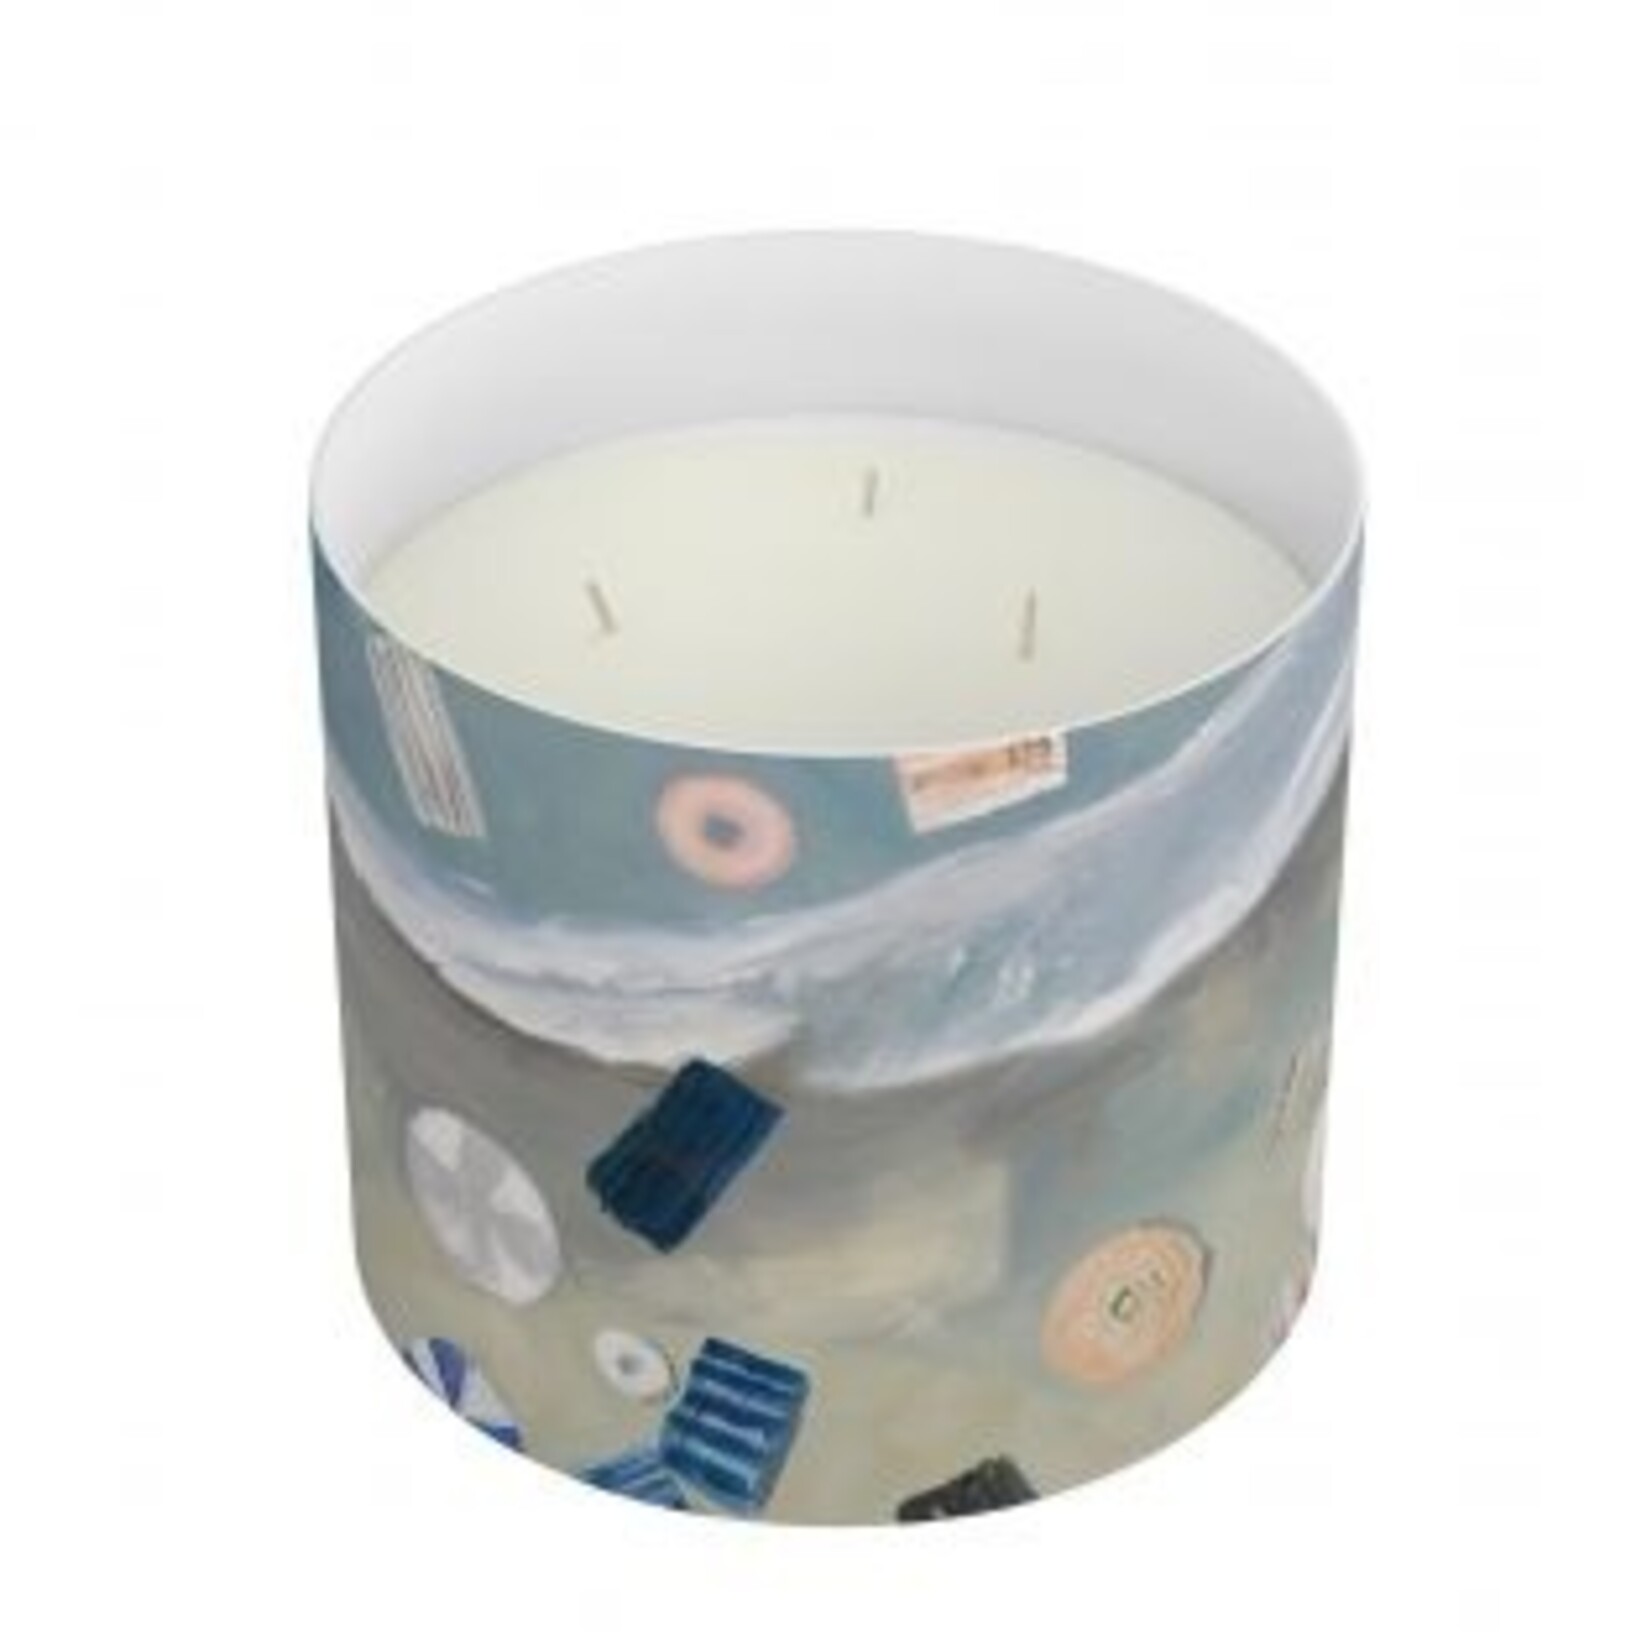 Annapolis Candle Annapolis Candle - 3 Wick Kim Hovell Beach Haven